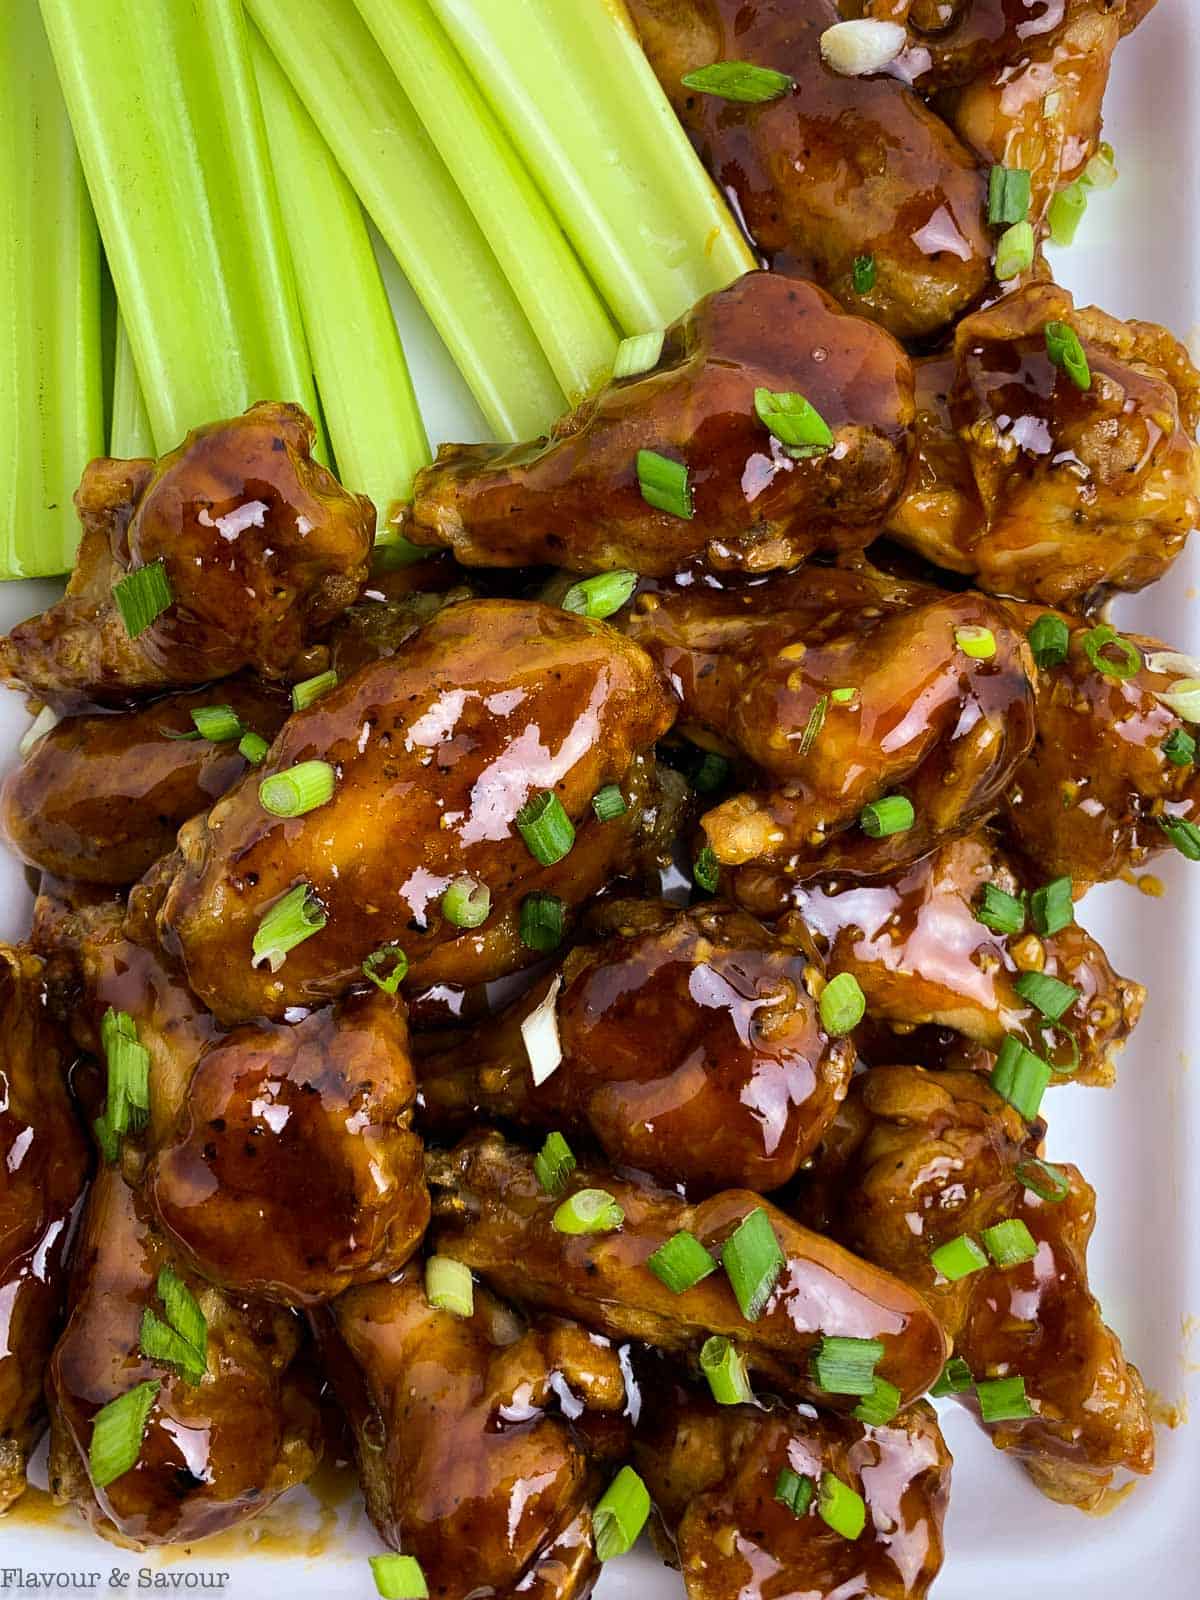 A platter of air-fried honey garlic wings with celery sticks.